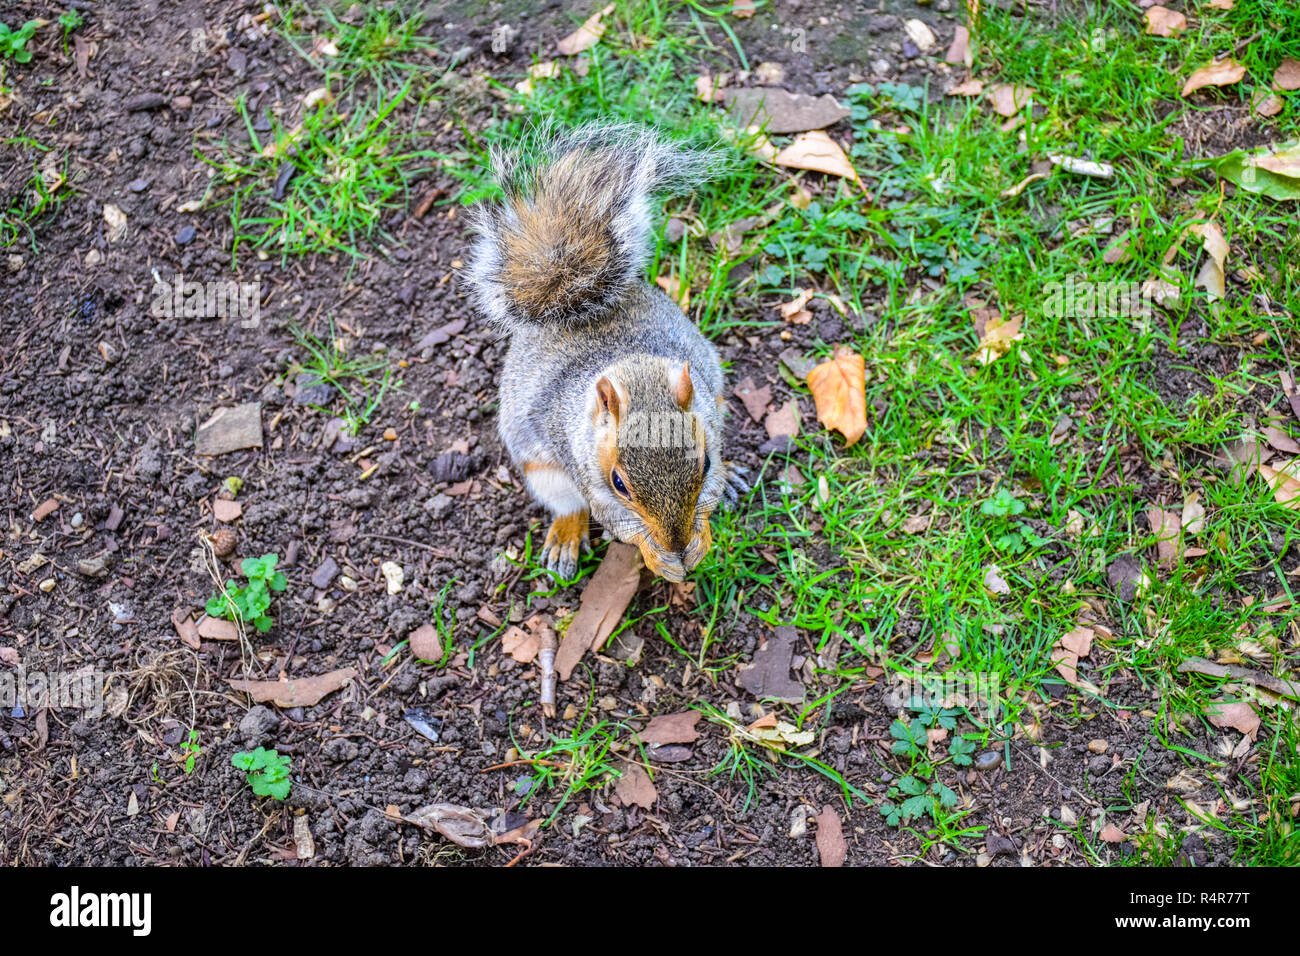 Cute squirrel running around and eating in St James's Park, London, England, United Kingdom Stock Photo